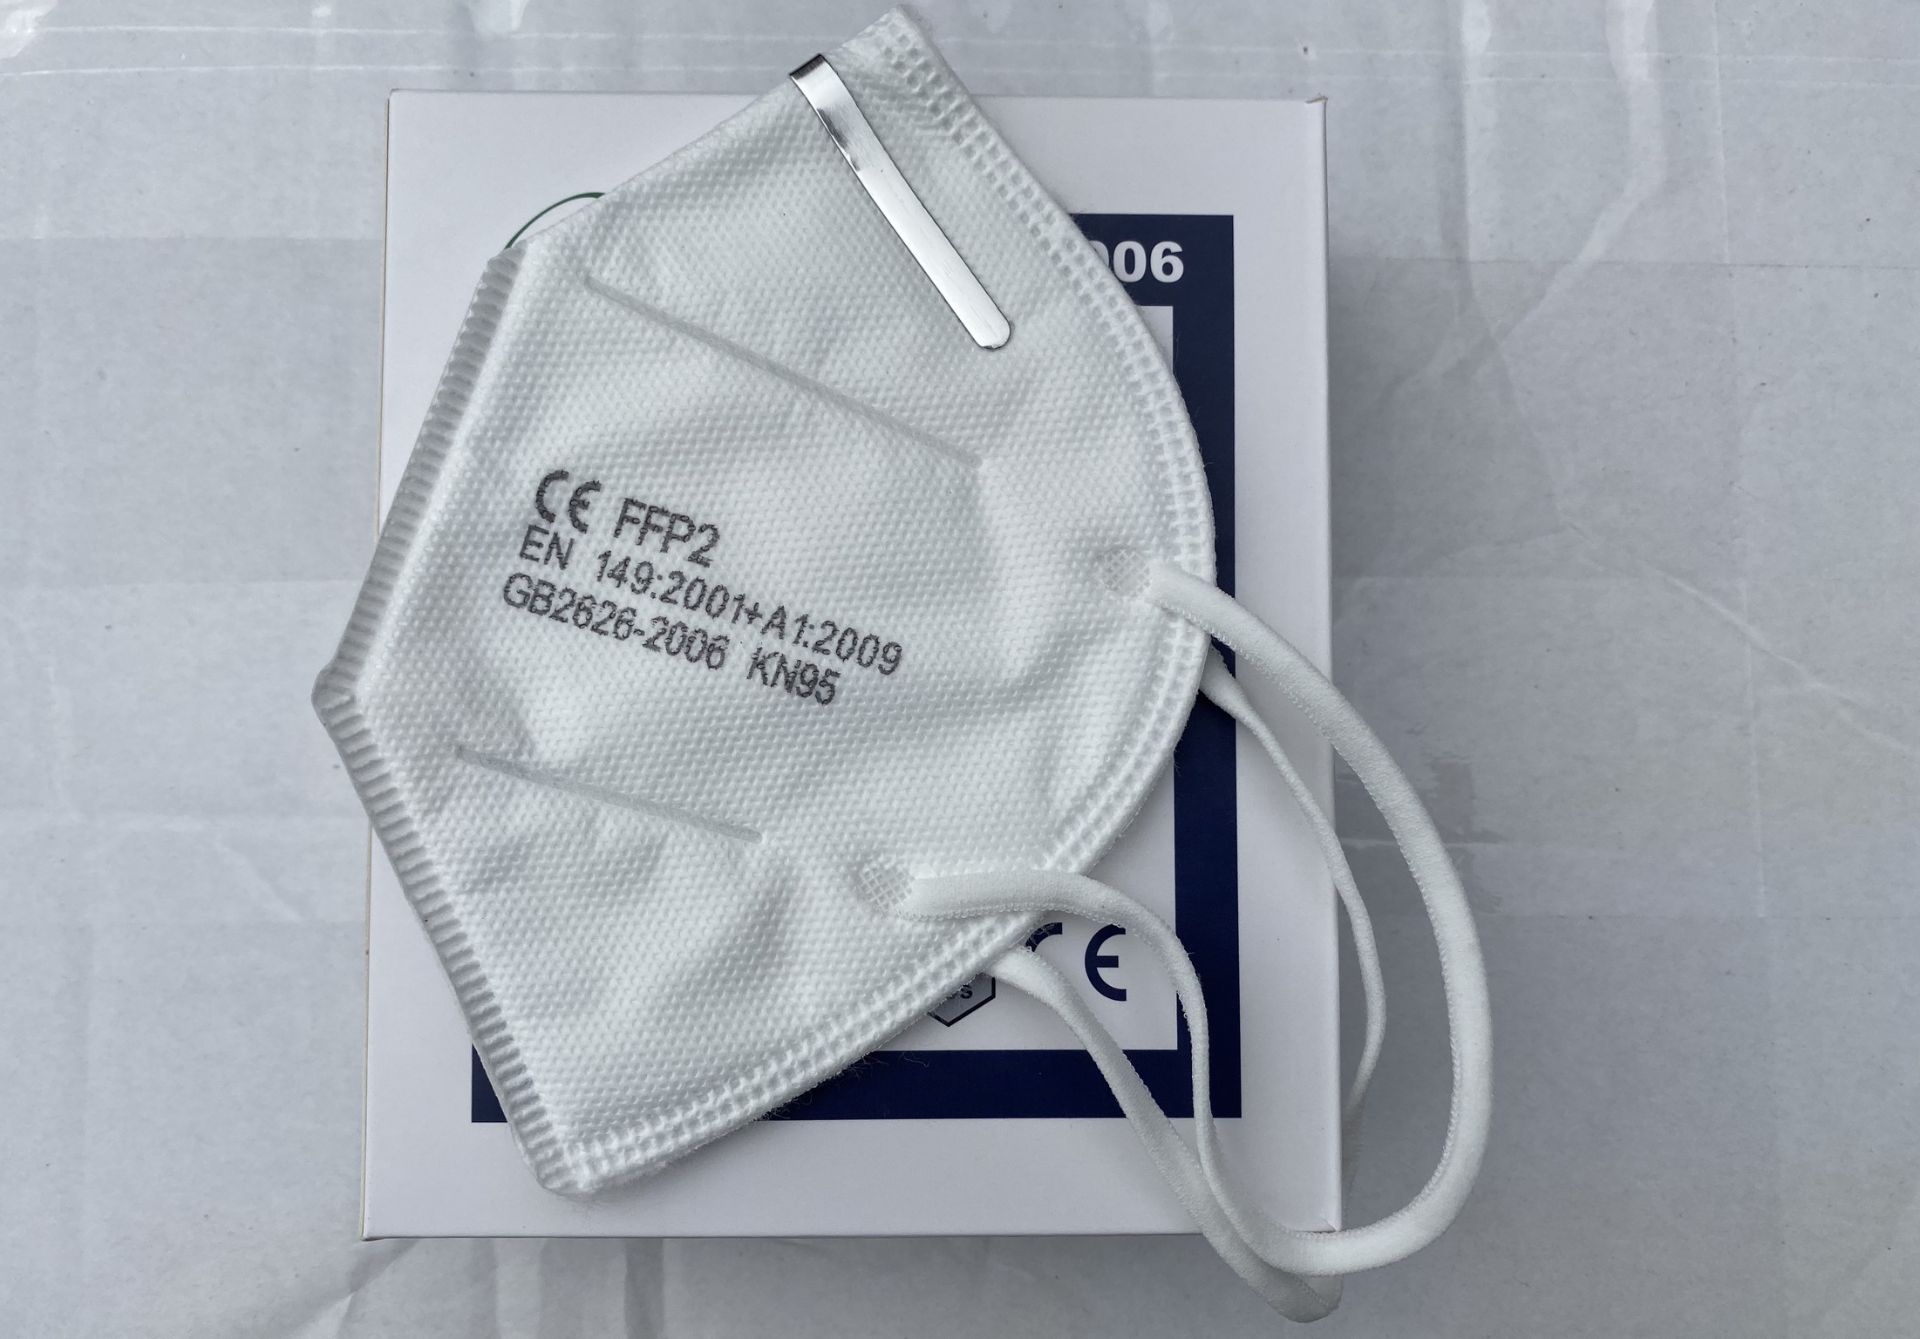 1,250X FFP2/KN95 FOLDING PROTECTIVE FACE MASK - Image 4 of 9